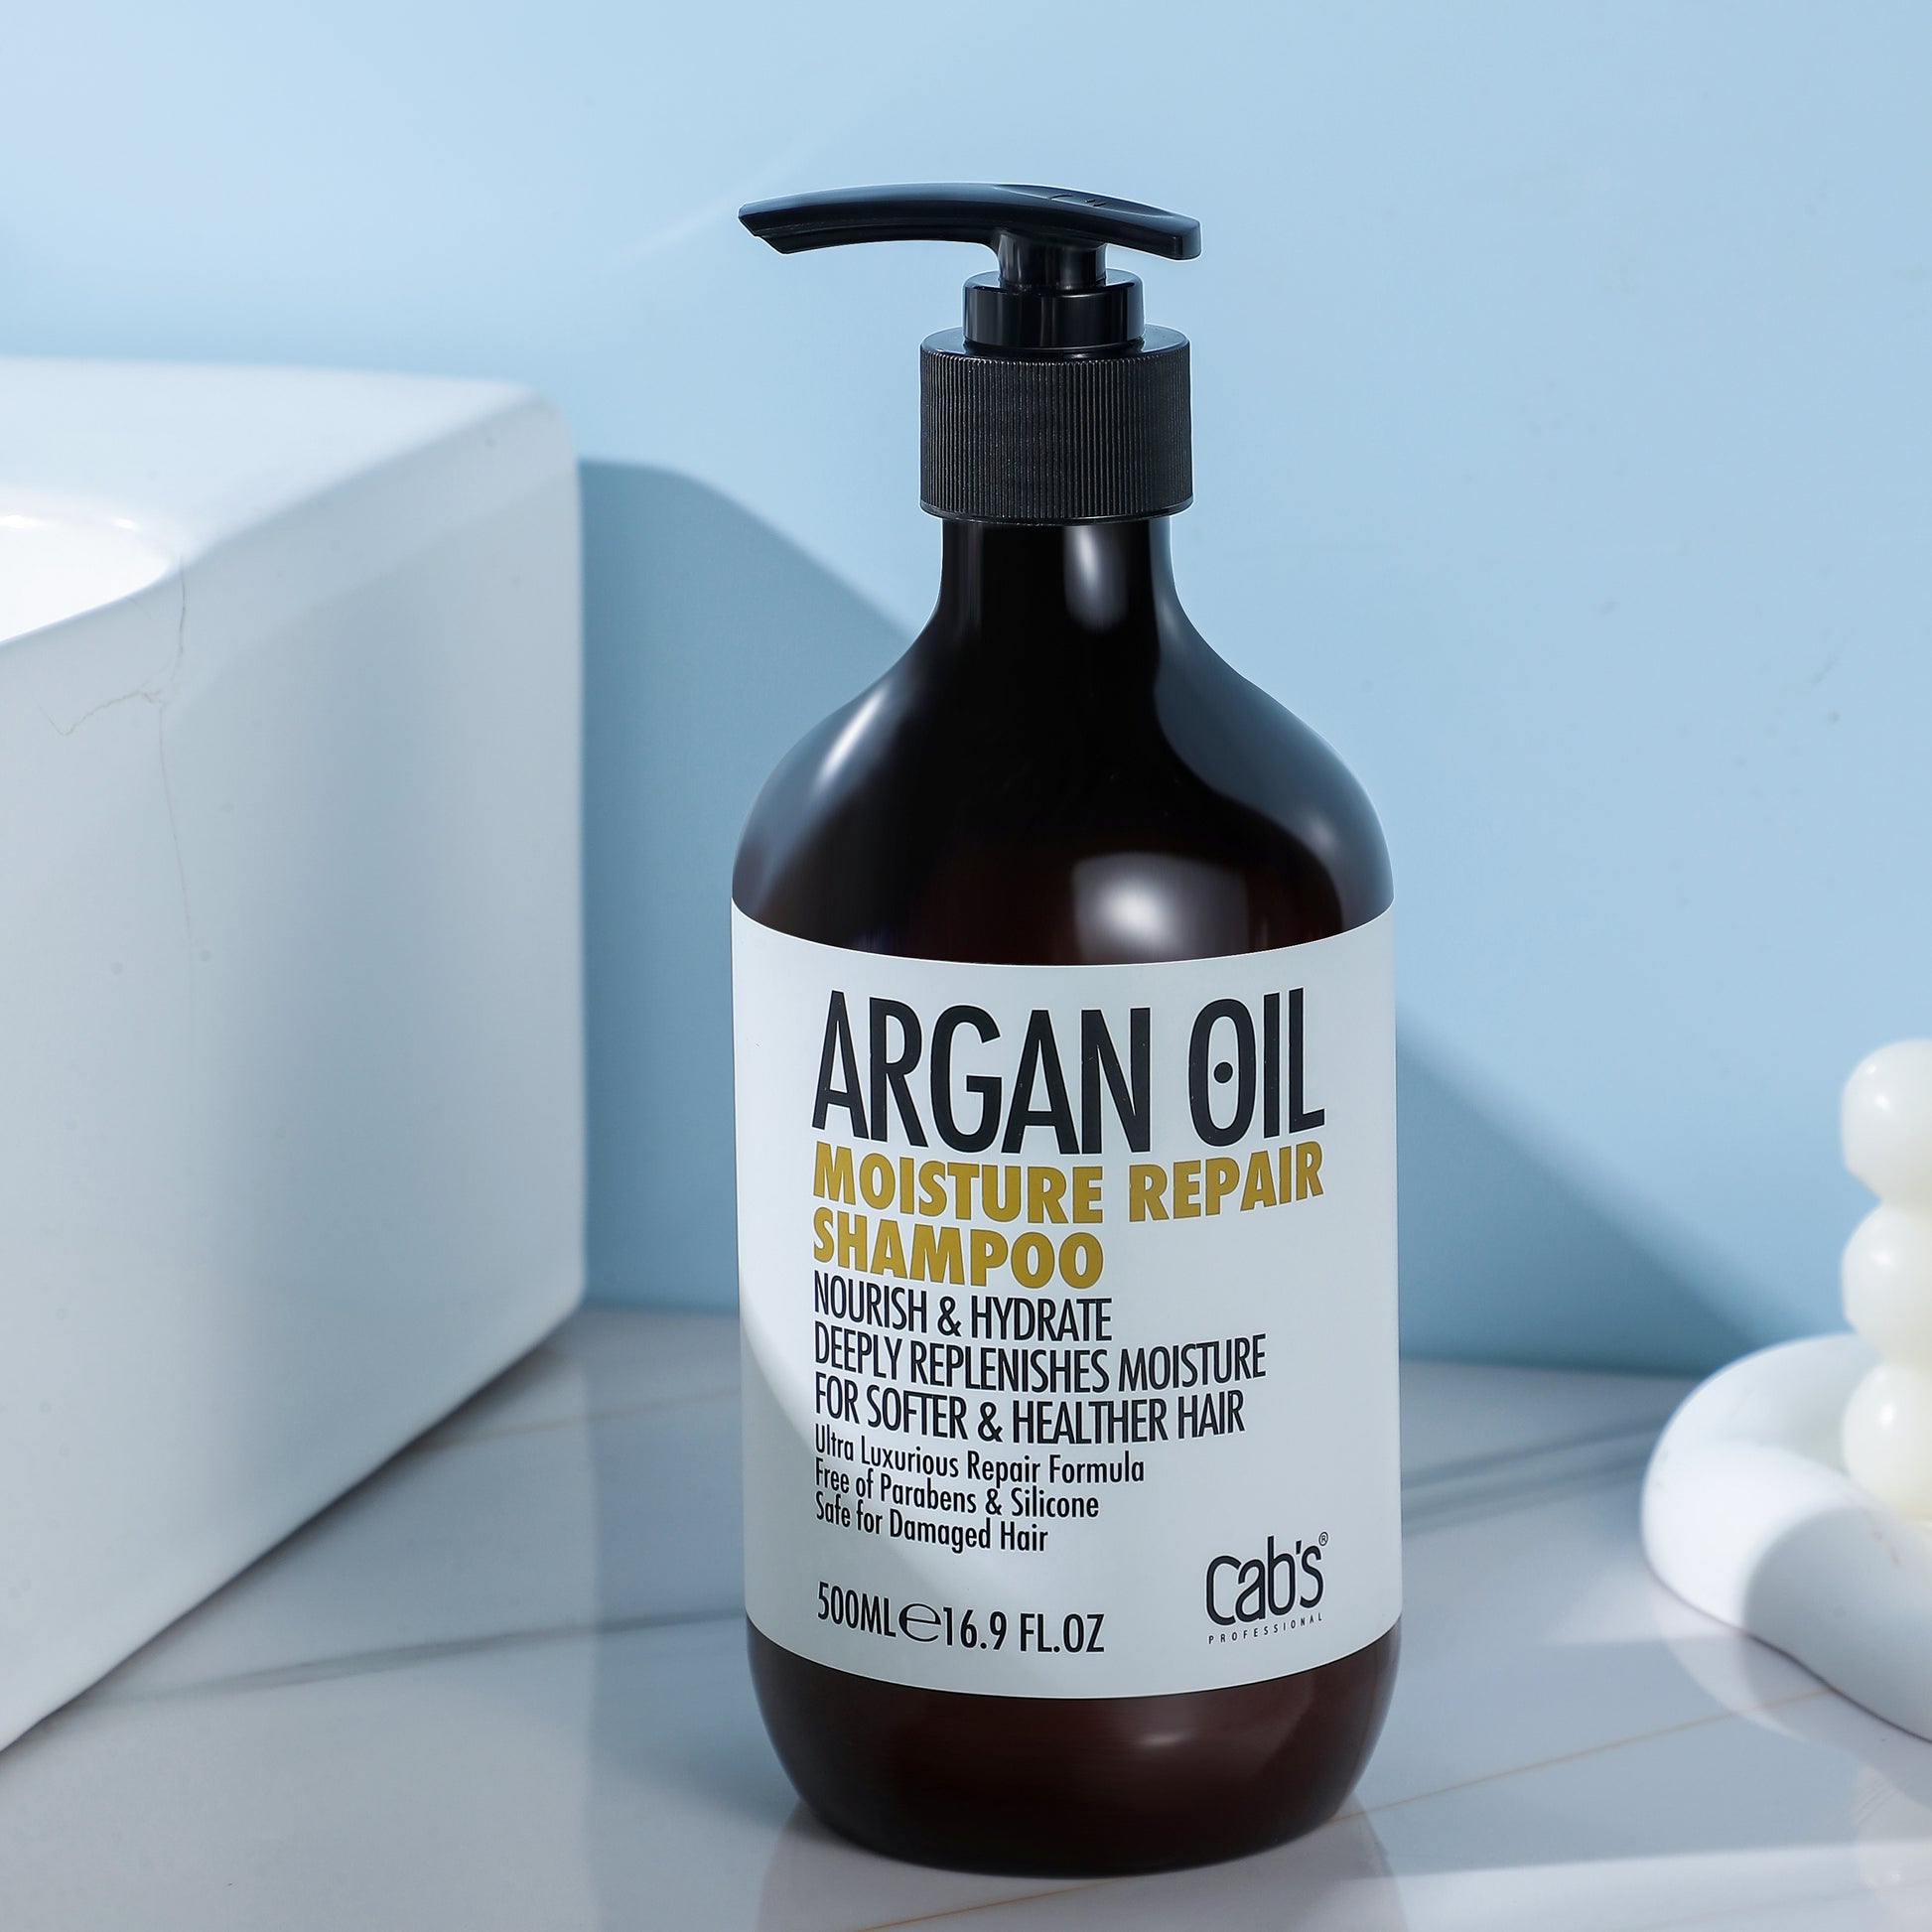 Silicon Mix Moroccan Argan Oil Treatment - Miss A Beauty Supply